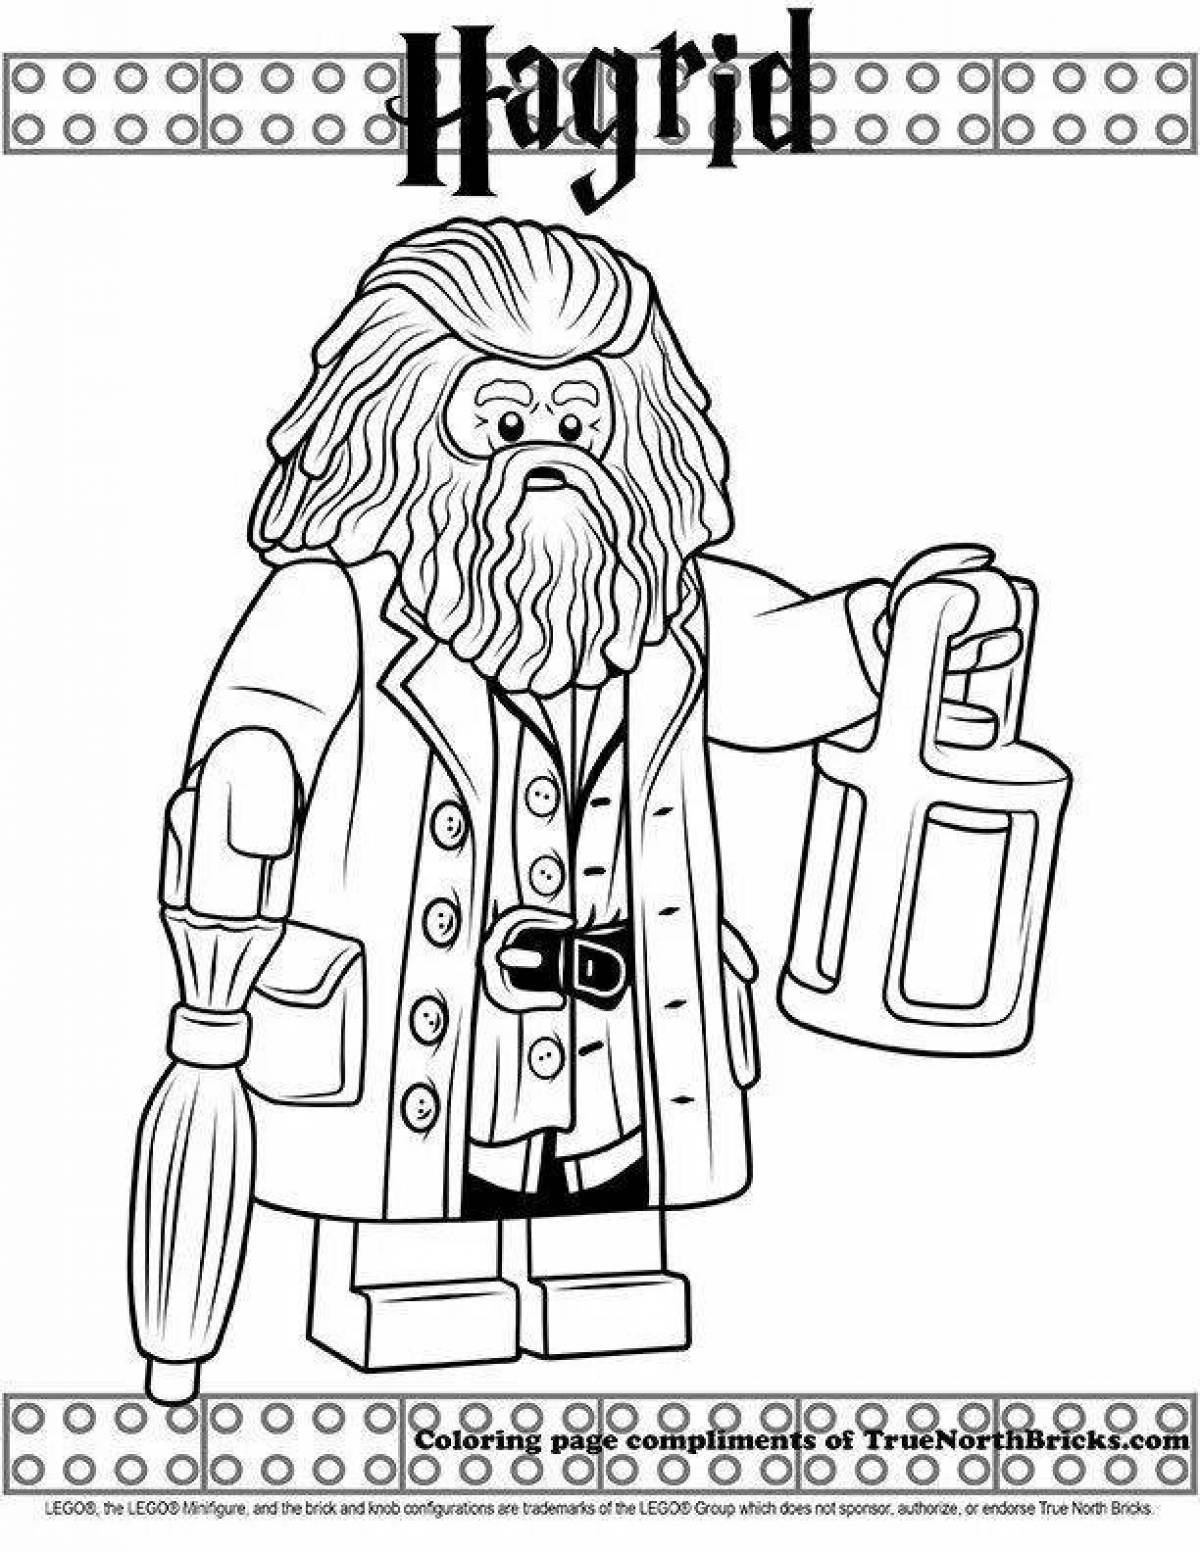 Playful lego harry potter coloring page